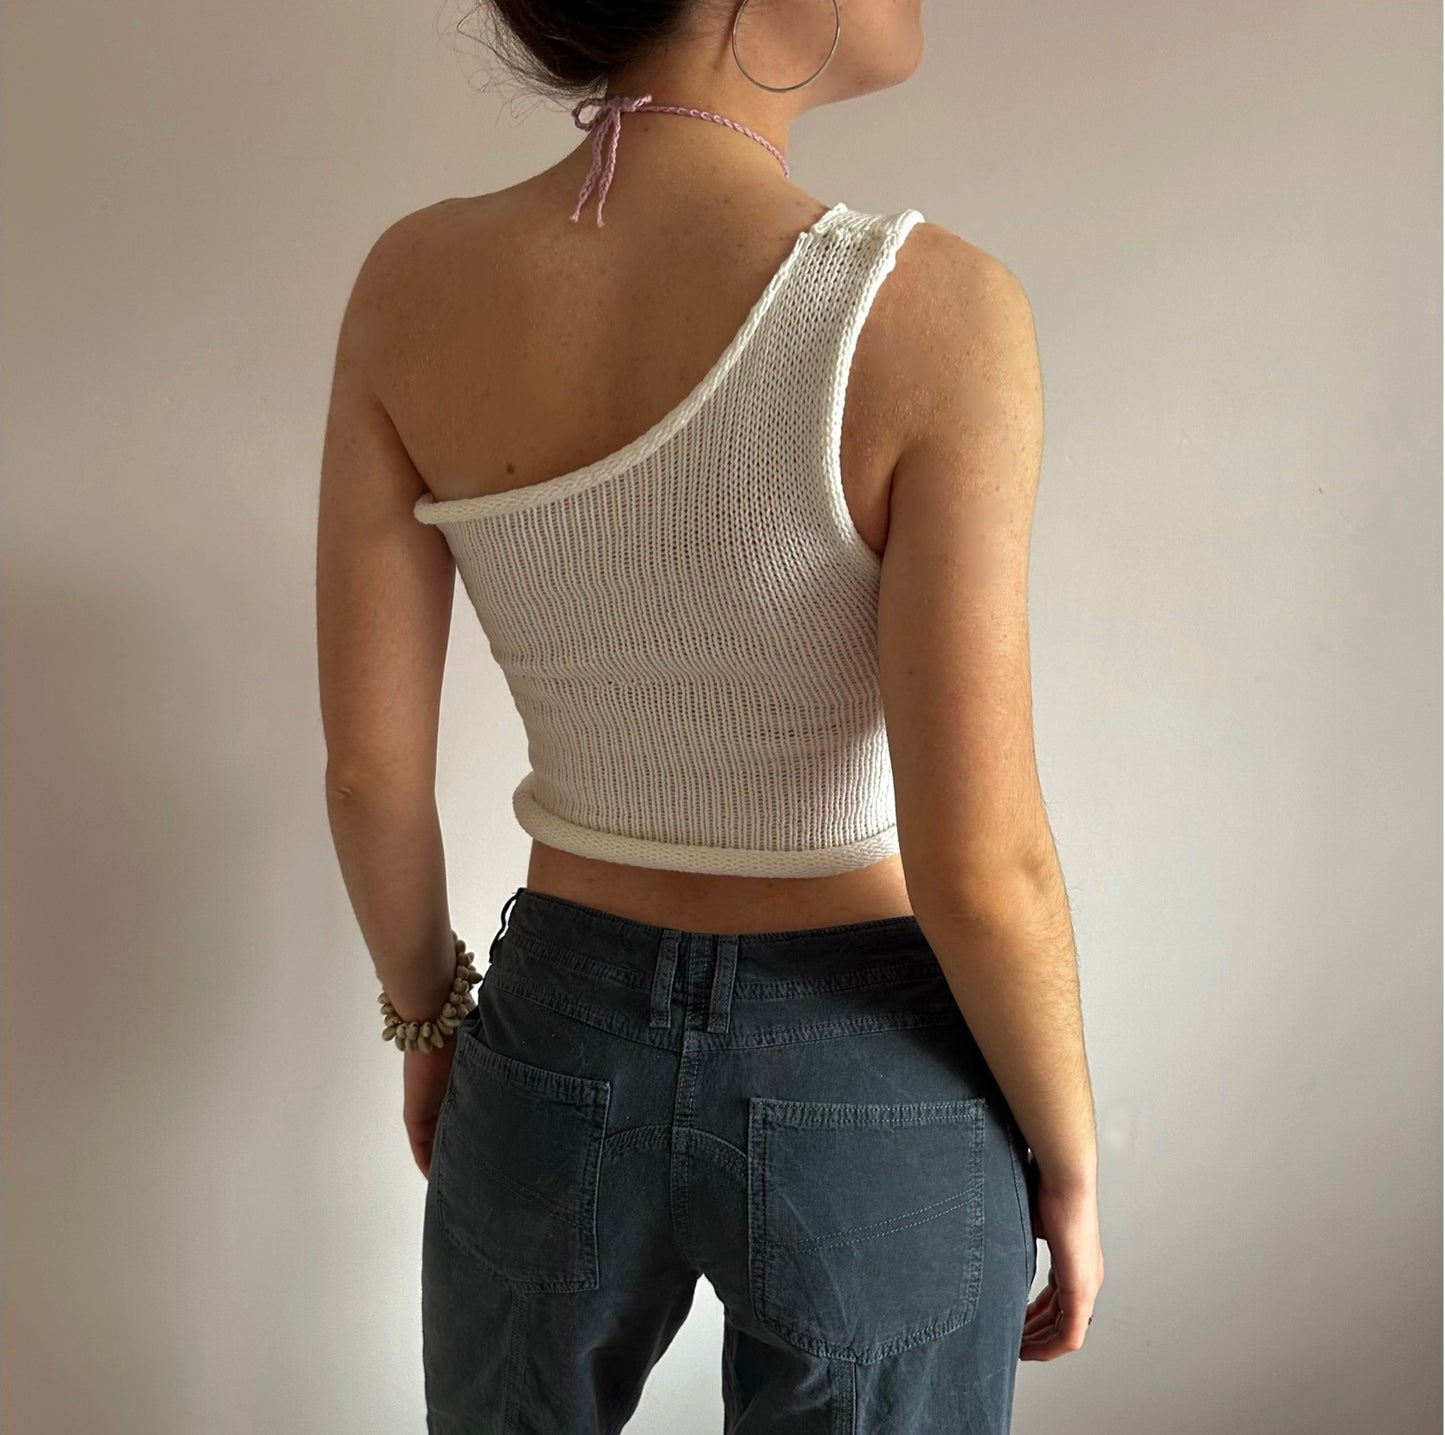 Handmade knitted white cotton asymmetrical one shoulder top